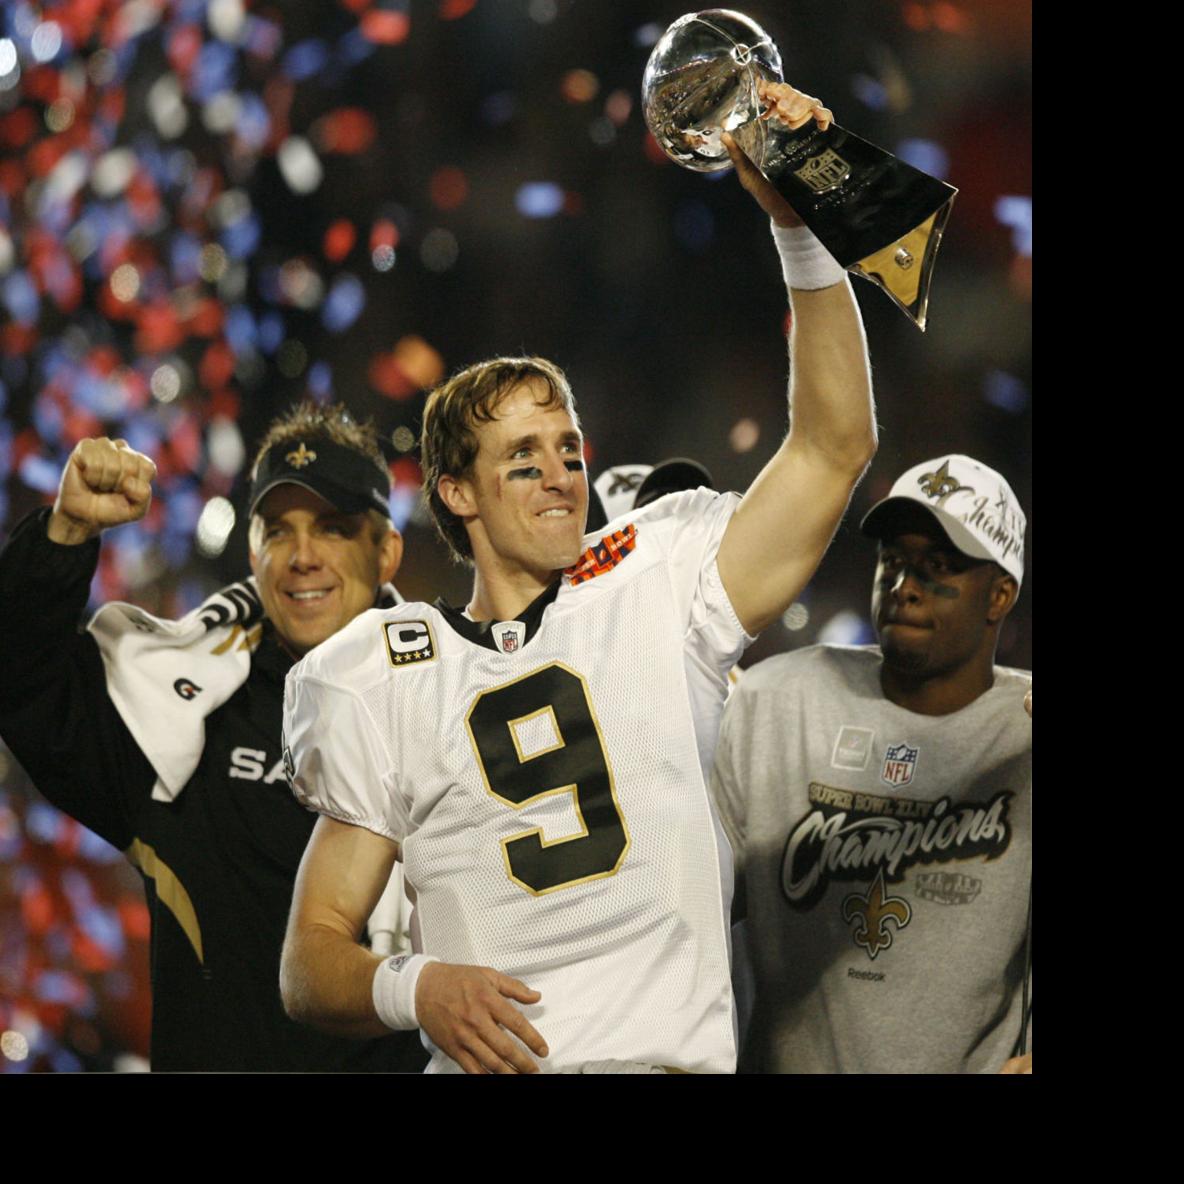 Drew Brees retires: Heart of NFL team and the city of New Orleans 